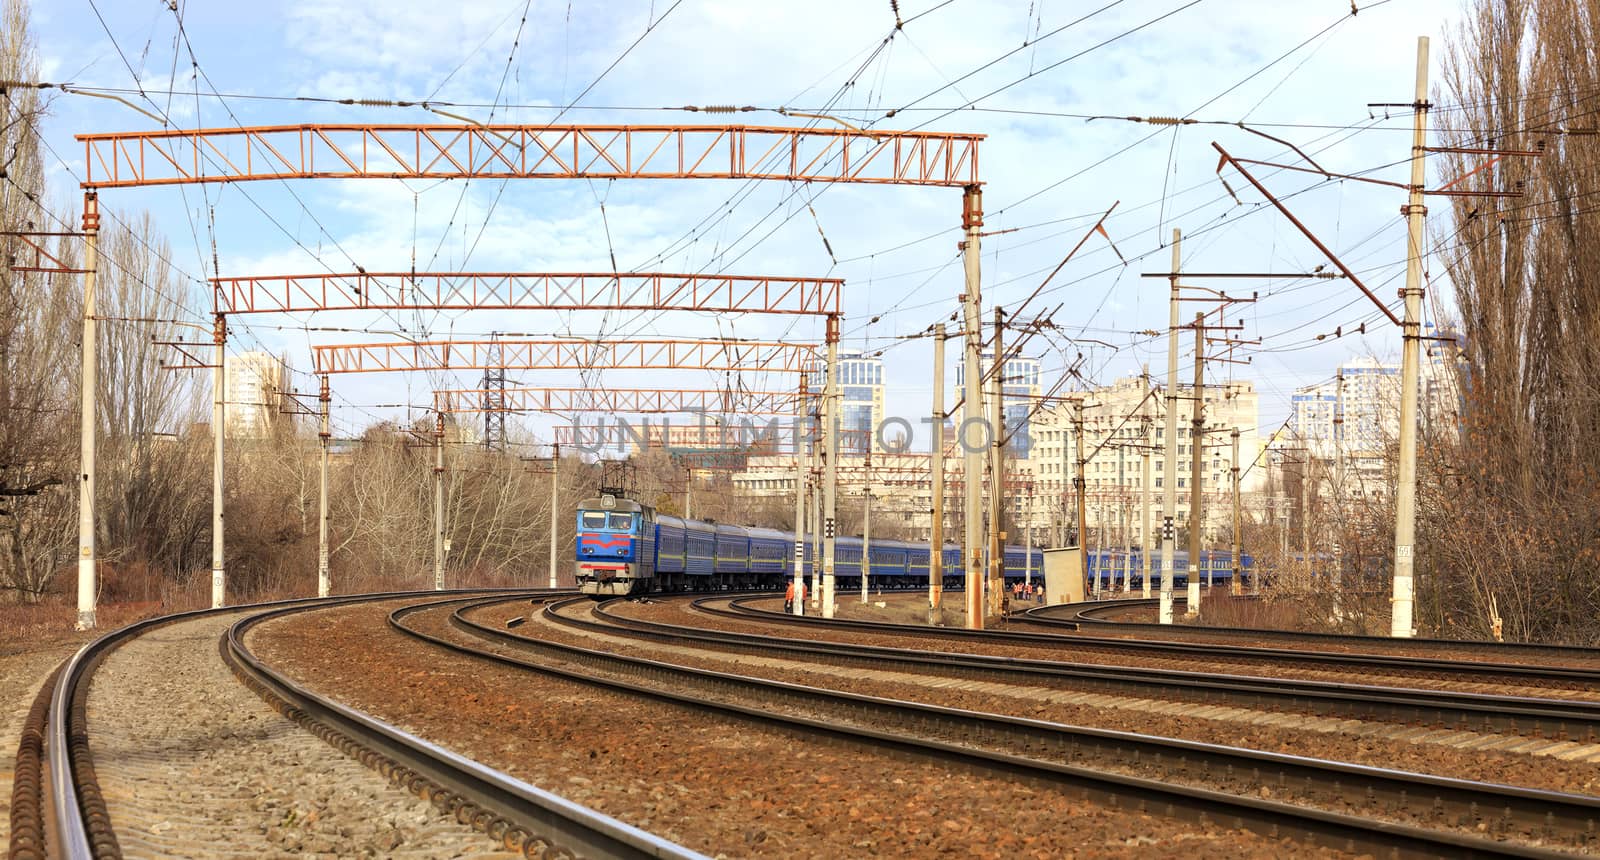 View of the moving railway passenger train in blue against the background of the cityscape